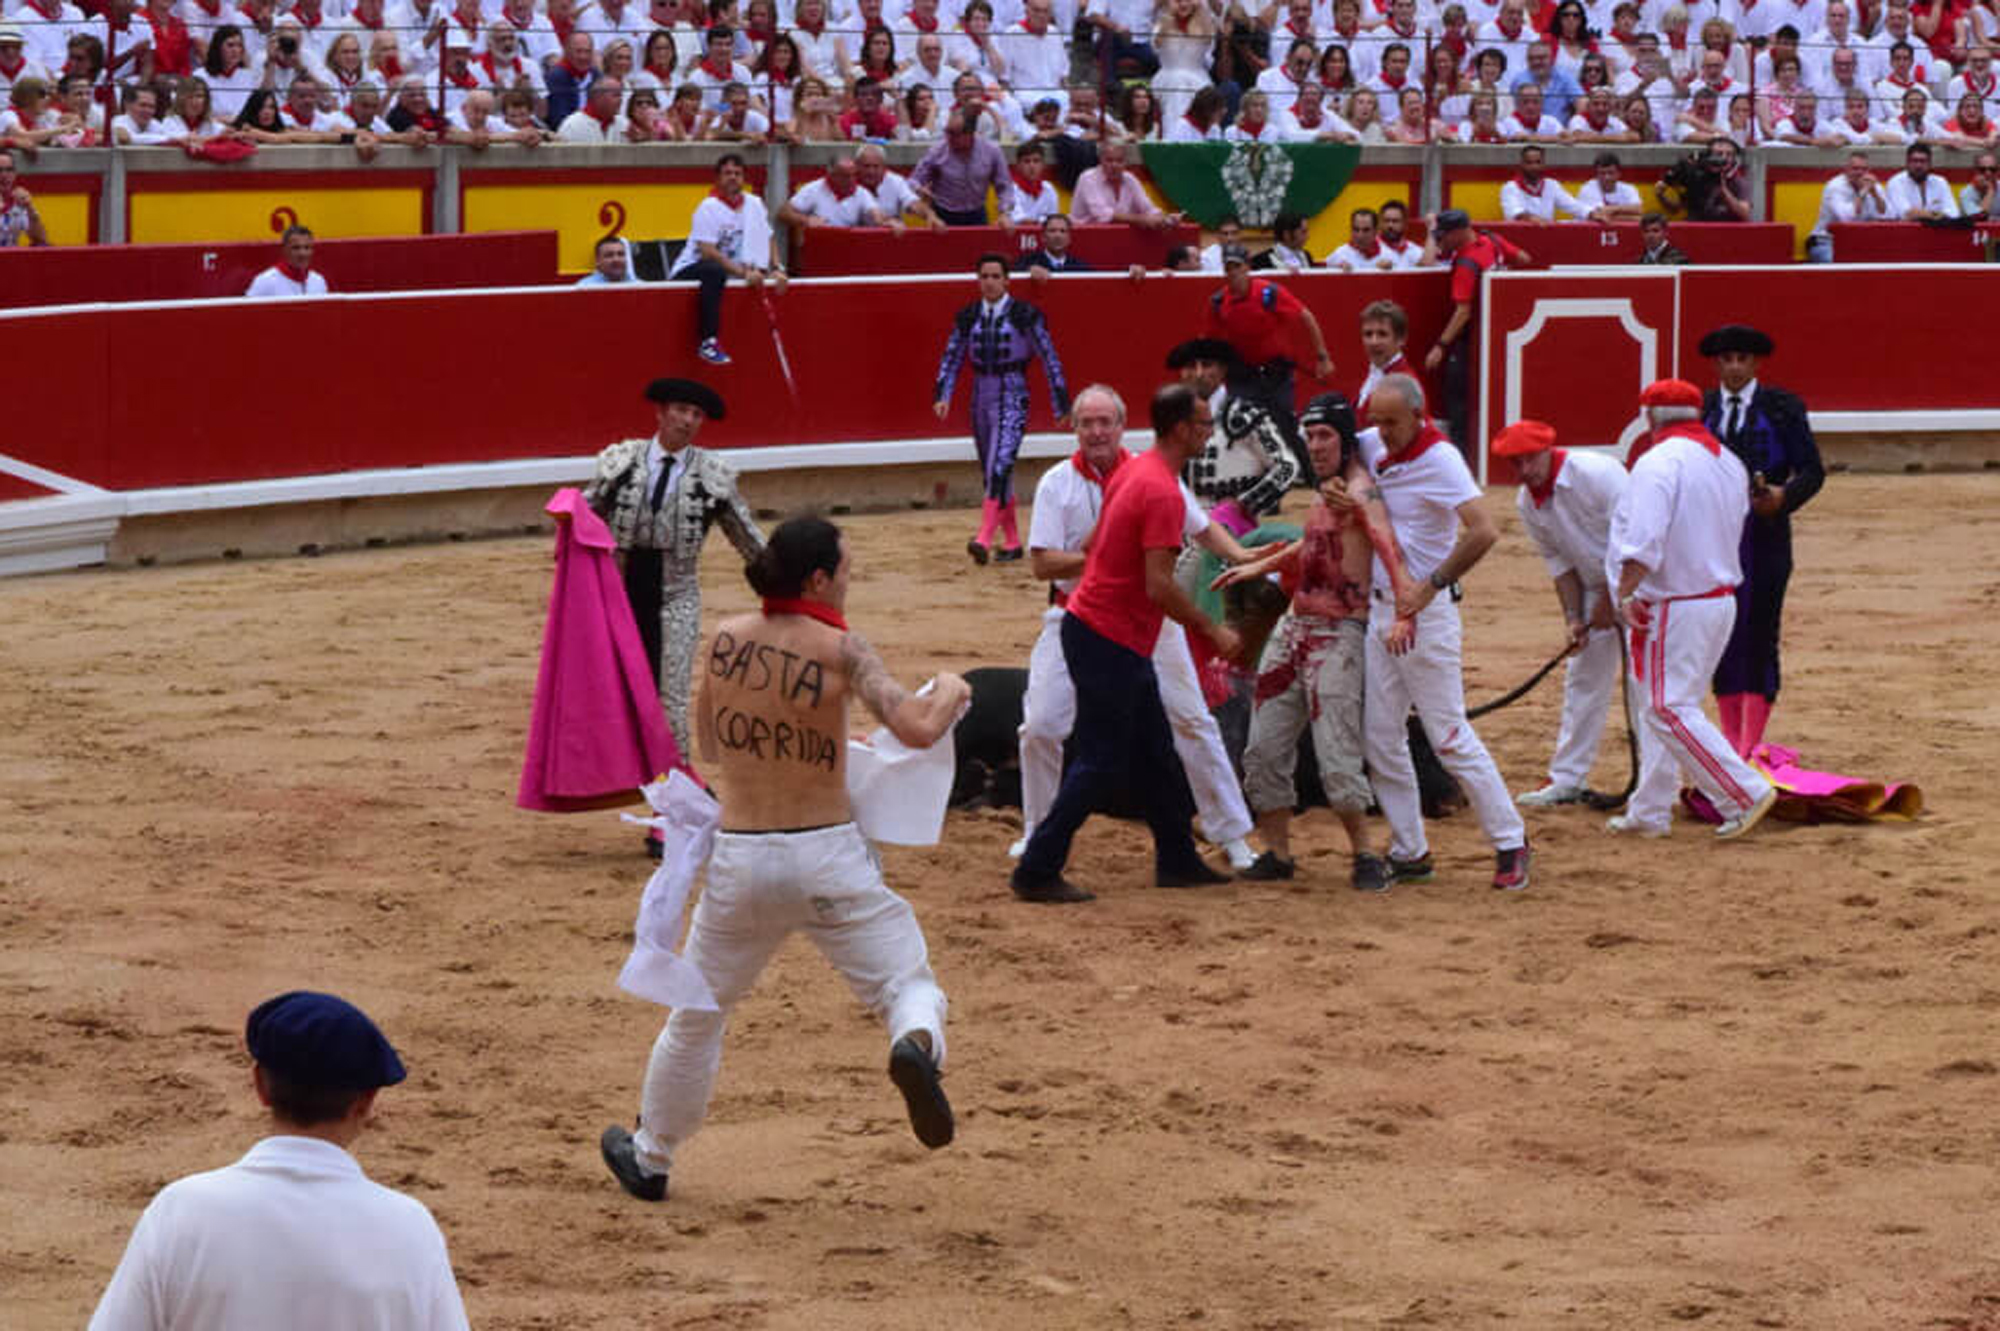 Animal activists invade a bullring, with man centre left displaying the legend "Just run" written on his back, attempting to intervene in the killing of a bull at this year's San Fermin festival and seeming to comfort the fatally wounded bull, in Pamplona, Spain, Thursday July 6, 2017. According to PETA (People for the Ethical Treatment of Animals) their protest aims to raise awareness about what they say is the "cruel and barbaric" way the animals are killed. (PETA/Vegan Strike Group via AP)